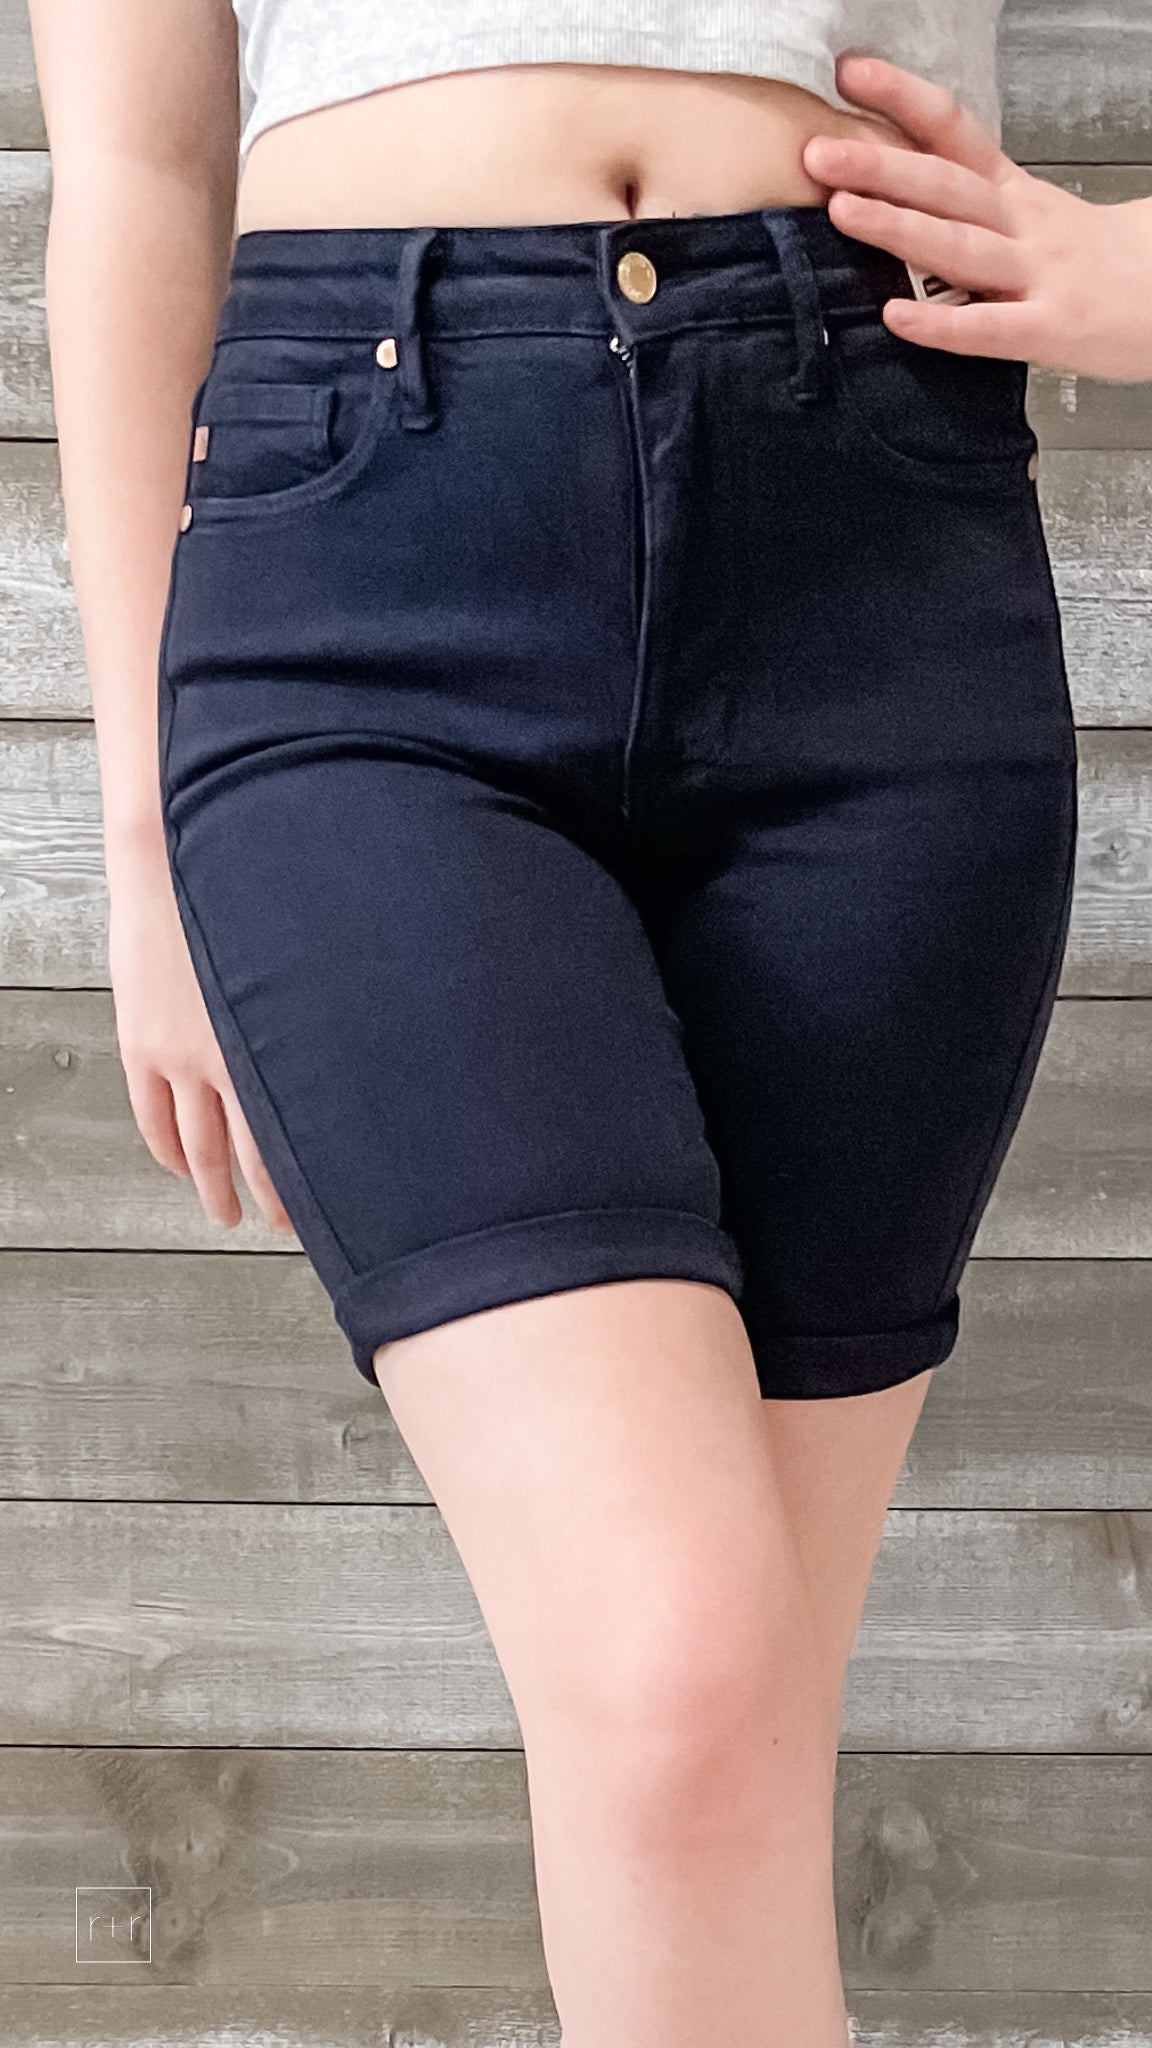 Best Deal for Women's High Waisted Skorts Tummy Control